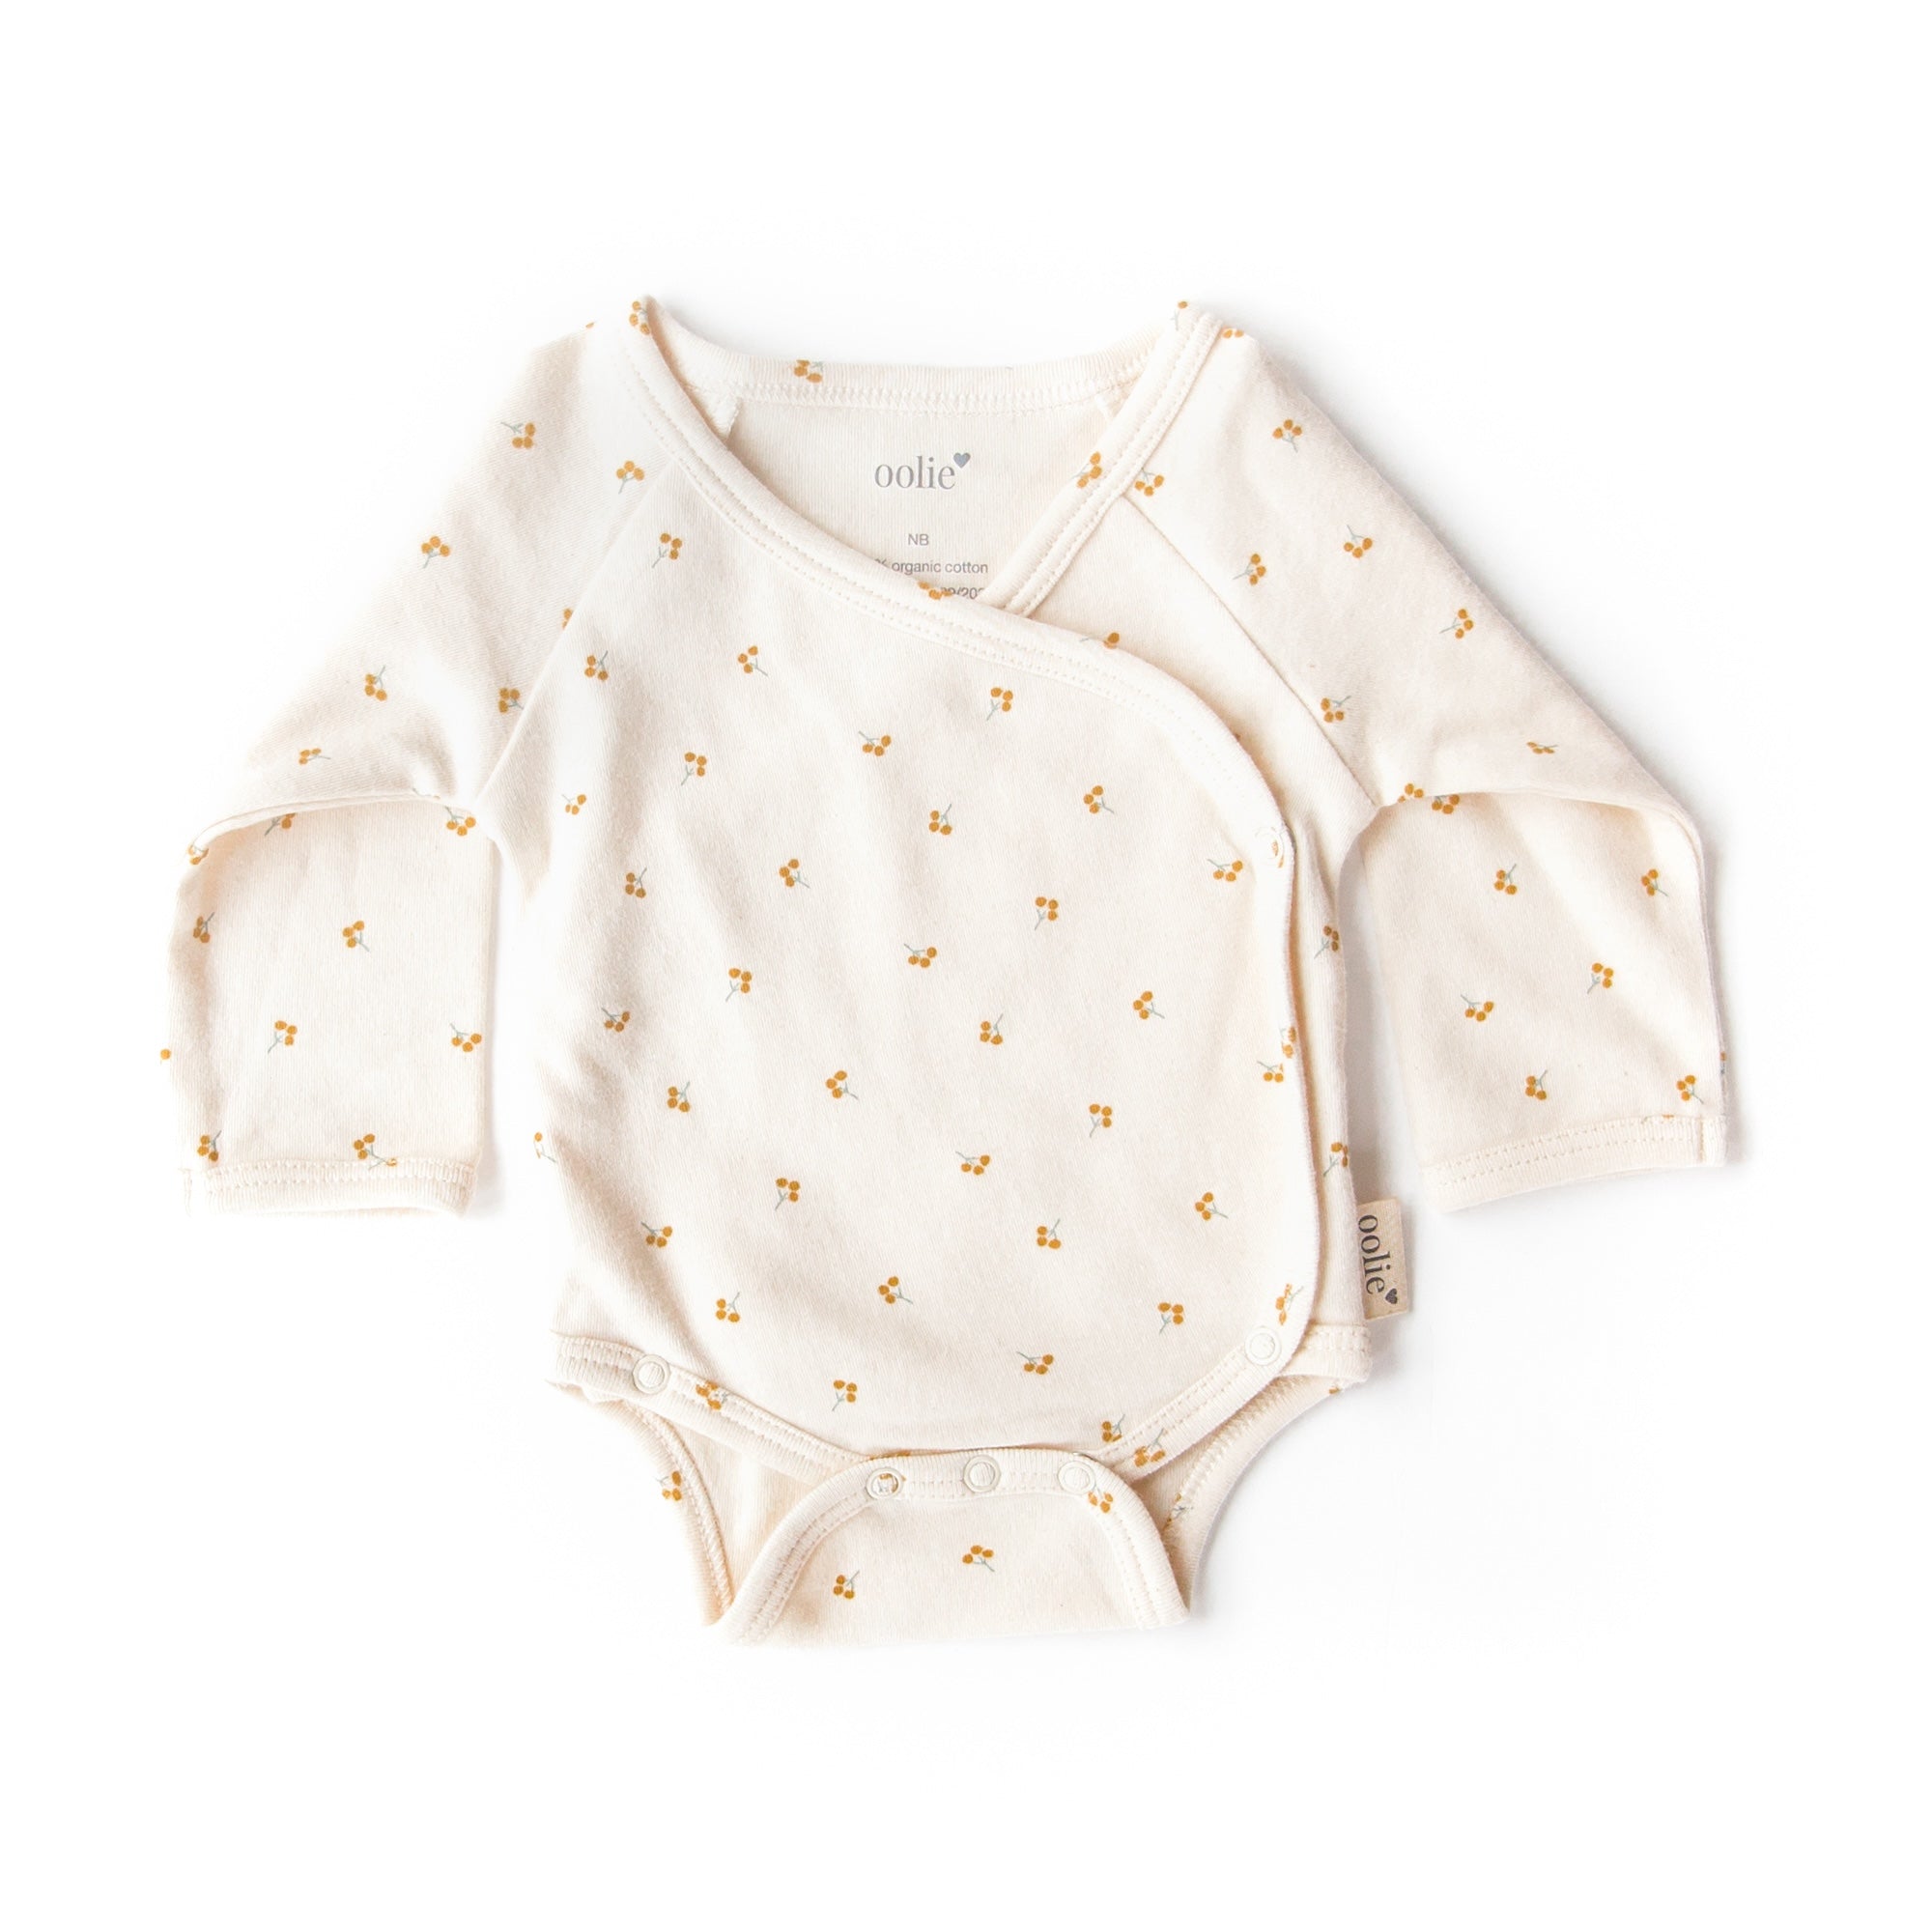 An Oolie organic cotton onesie with the gold sprig print, a natural color with small sprigs of golden berries.